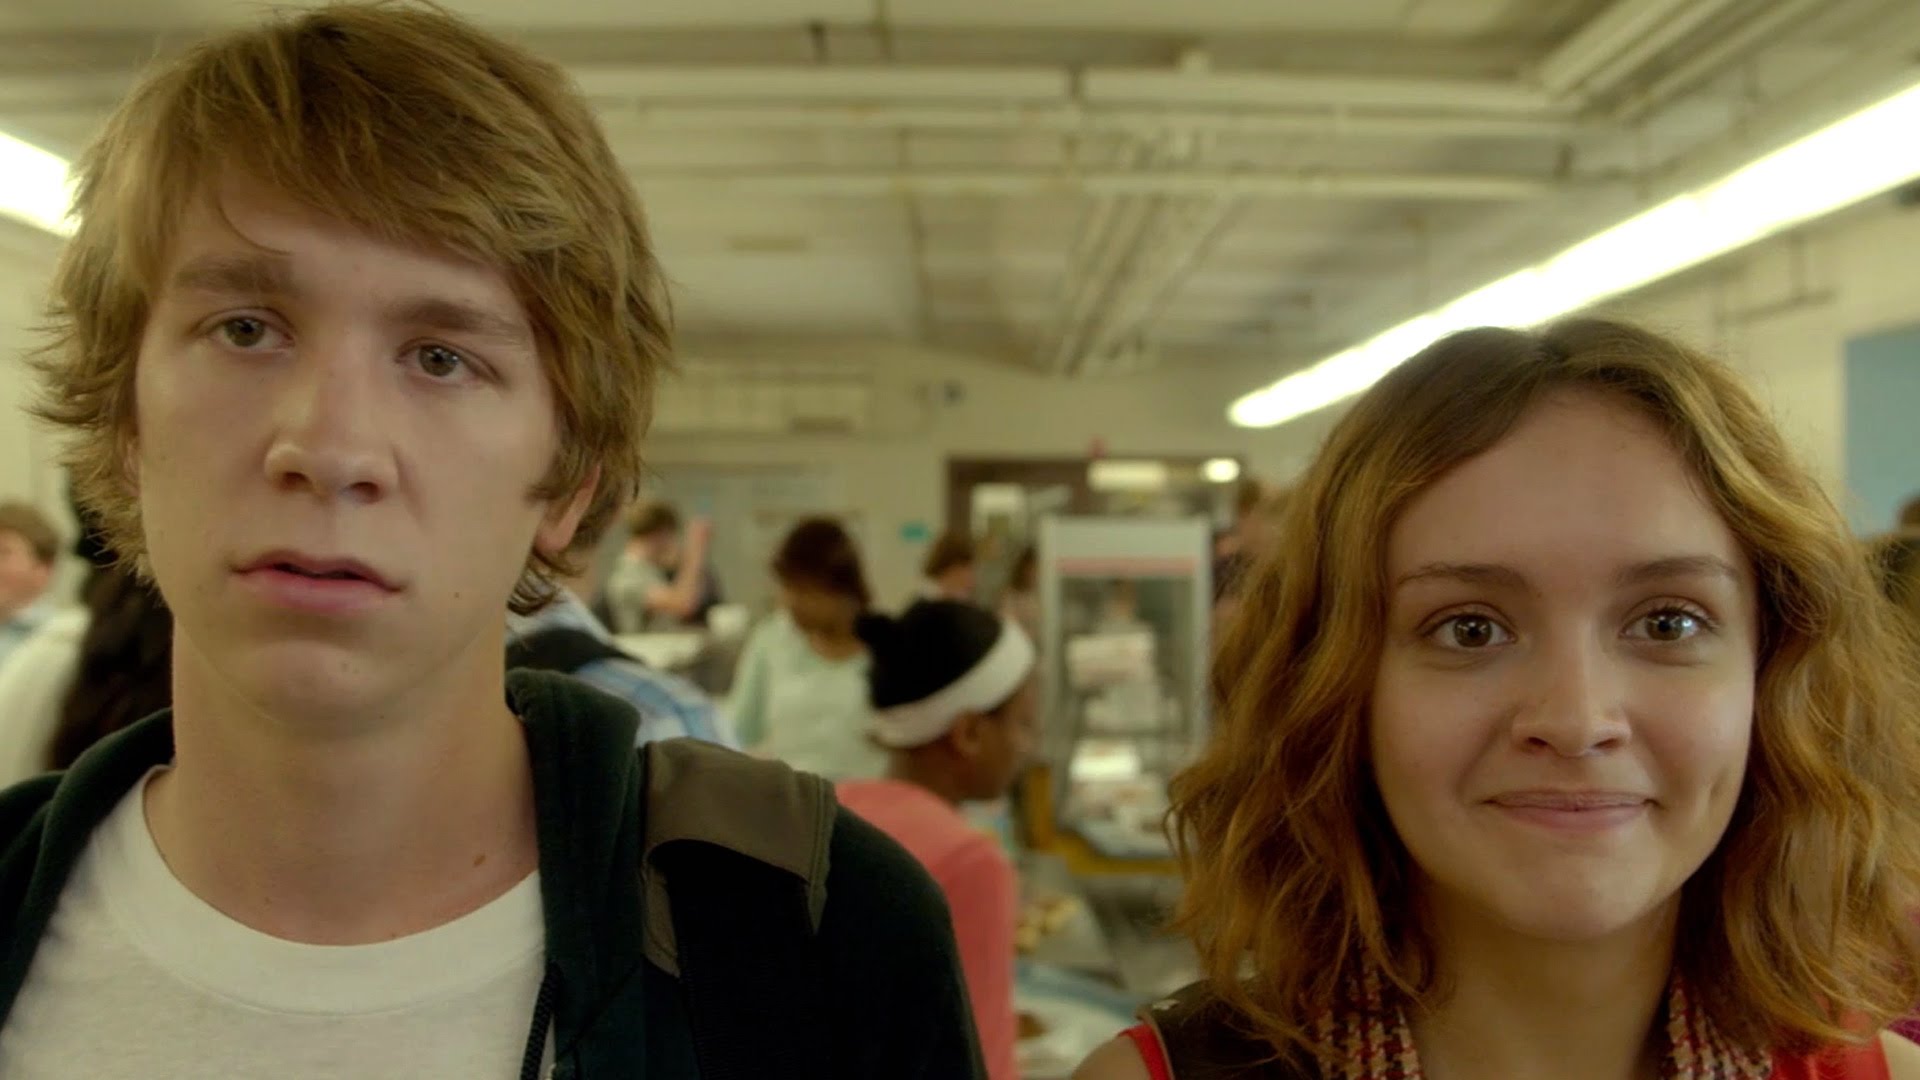 Me And Earl And The Dying Girl Backgrounds, Compatible - PC, Mobile, Gadgets| 1920x1080 px